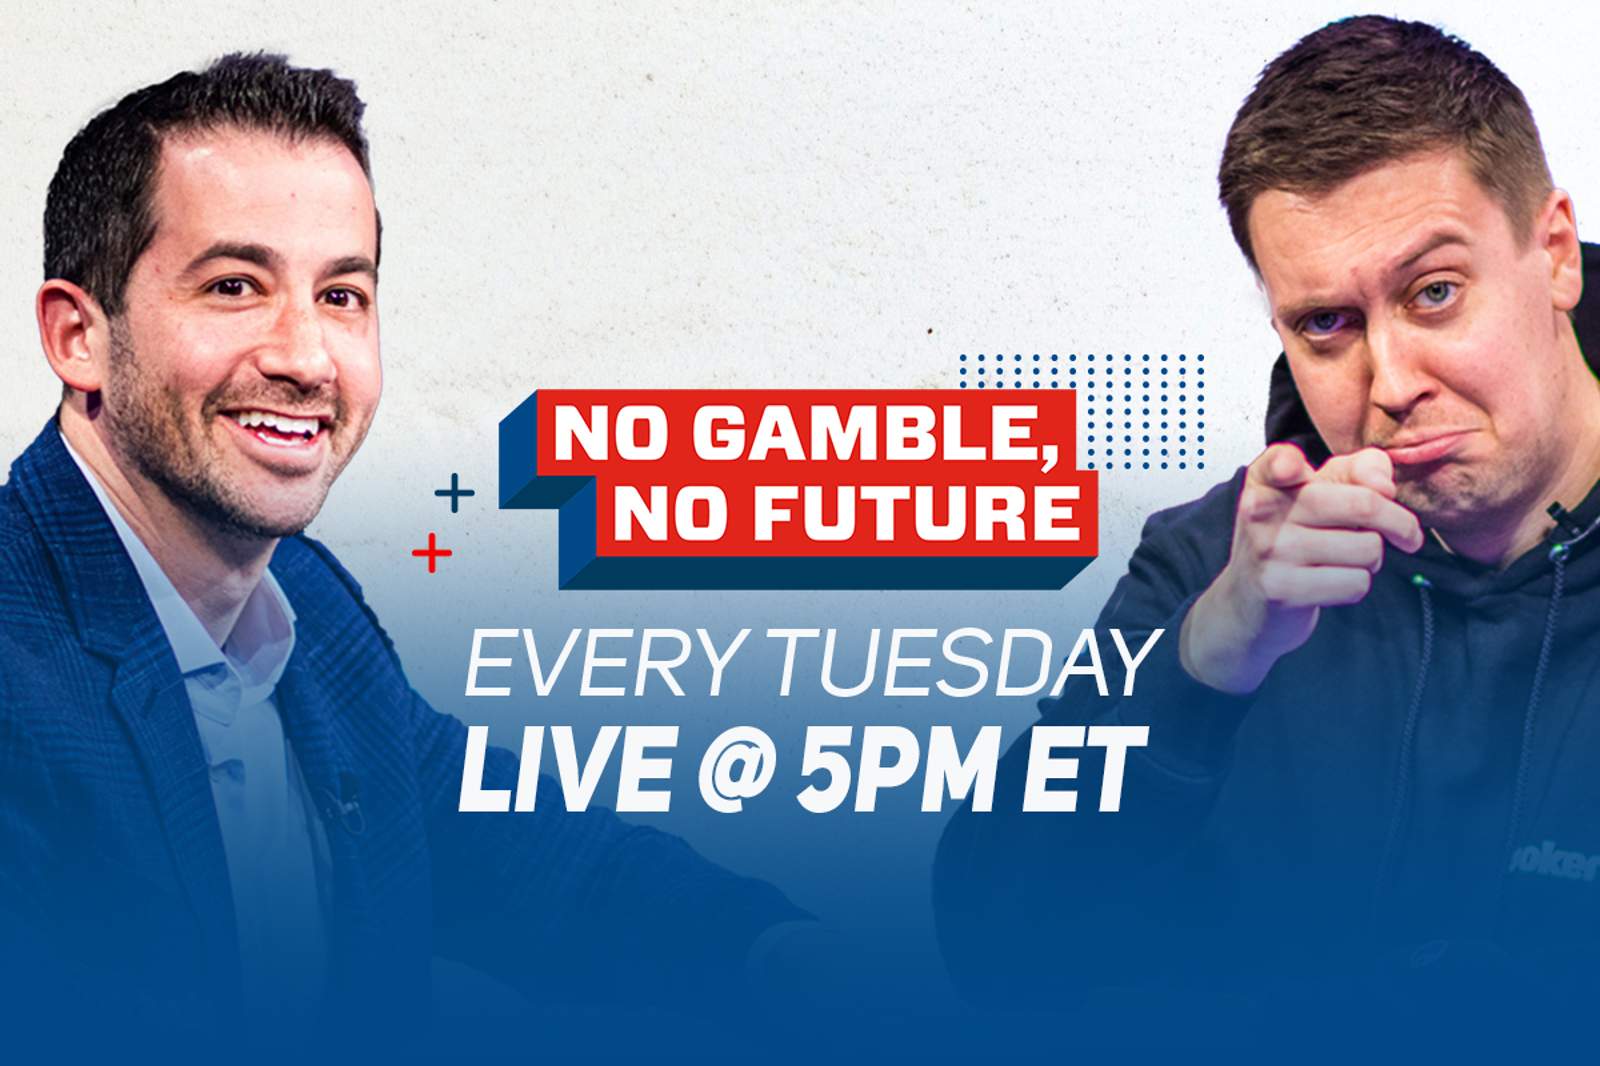 No Gamble, No Future Episode 3 on Today at 5 p.m. ET